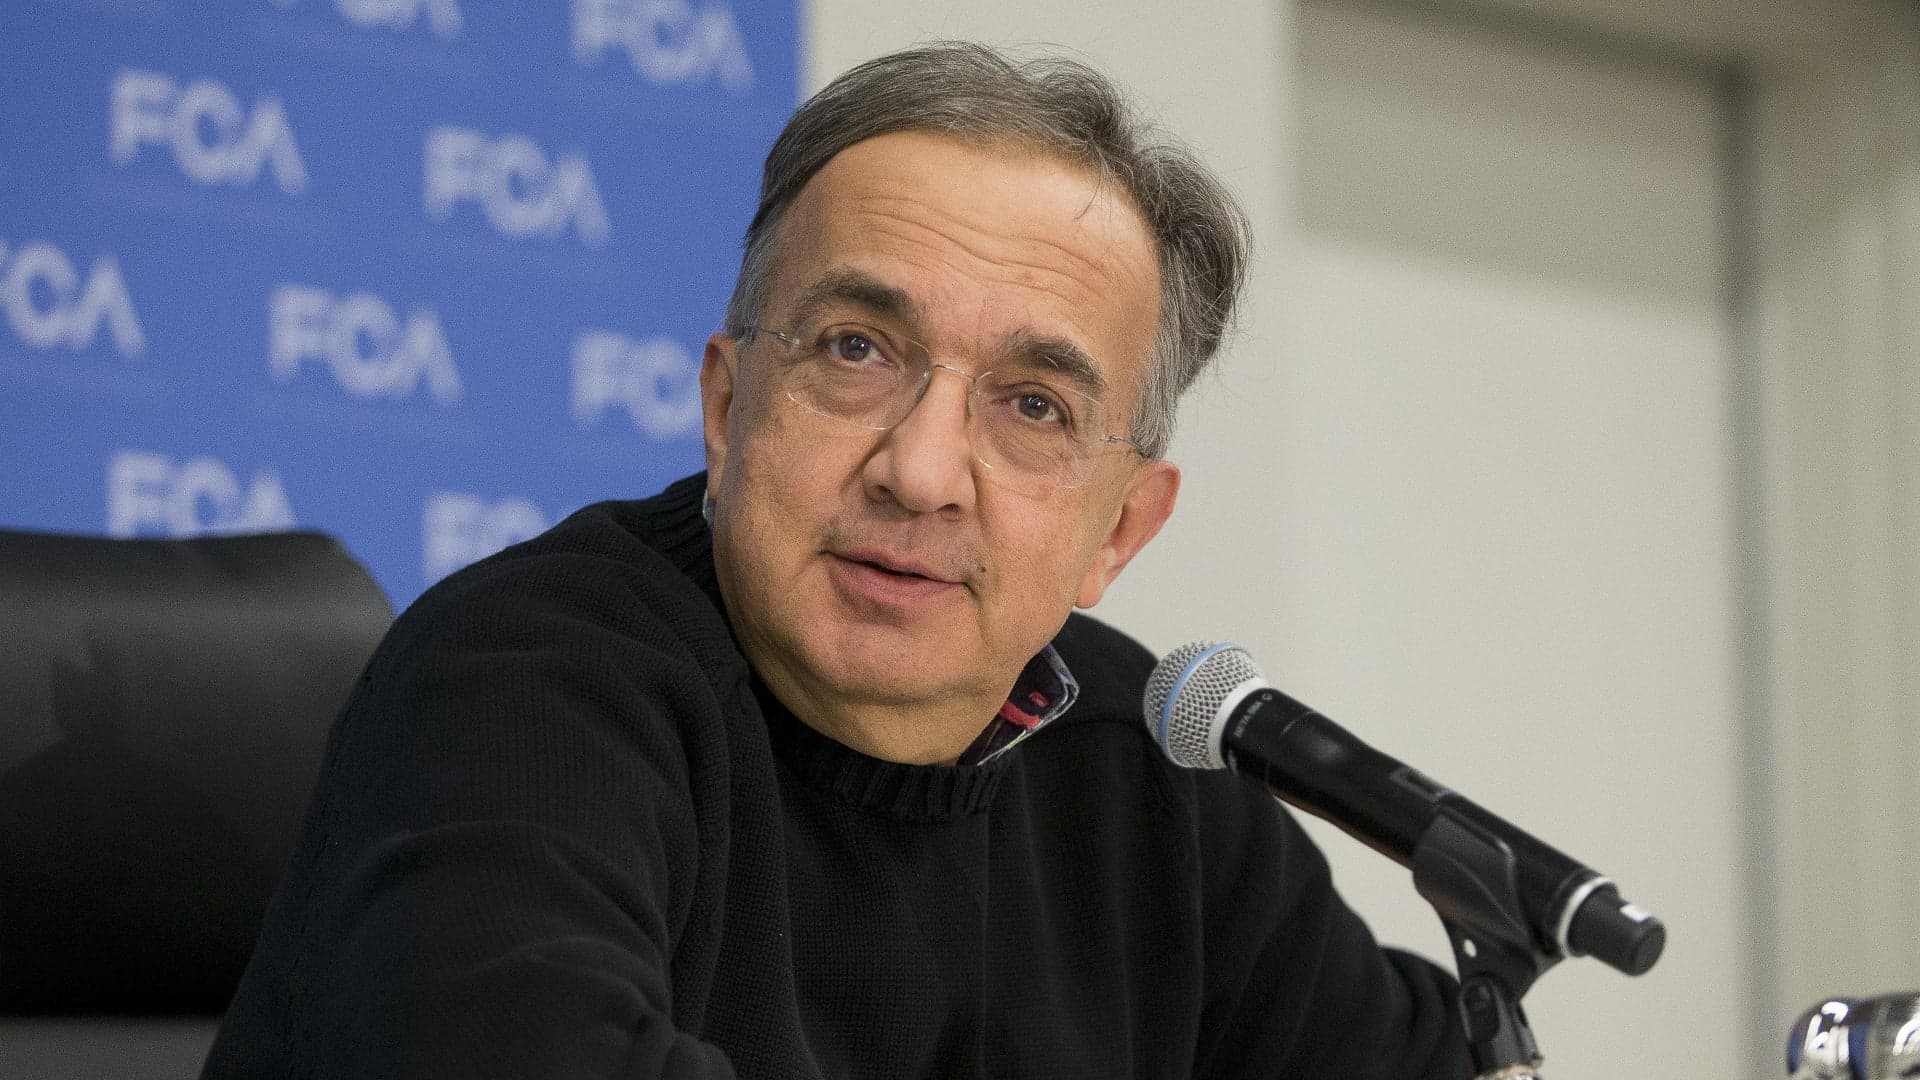 Jeep, Ram Could Be Spun Off, Fiat Chrysler CEO Marchionne Says